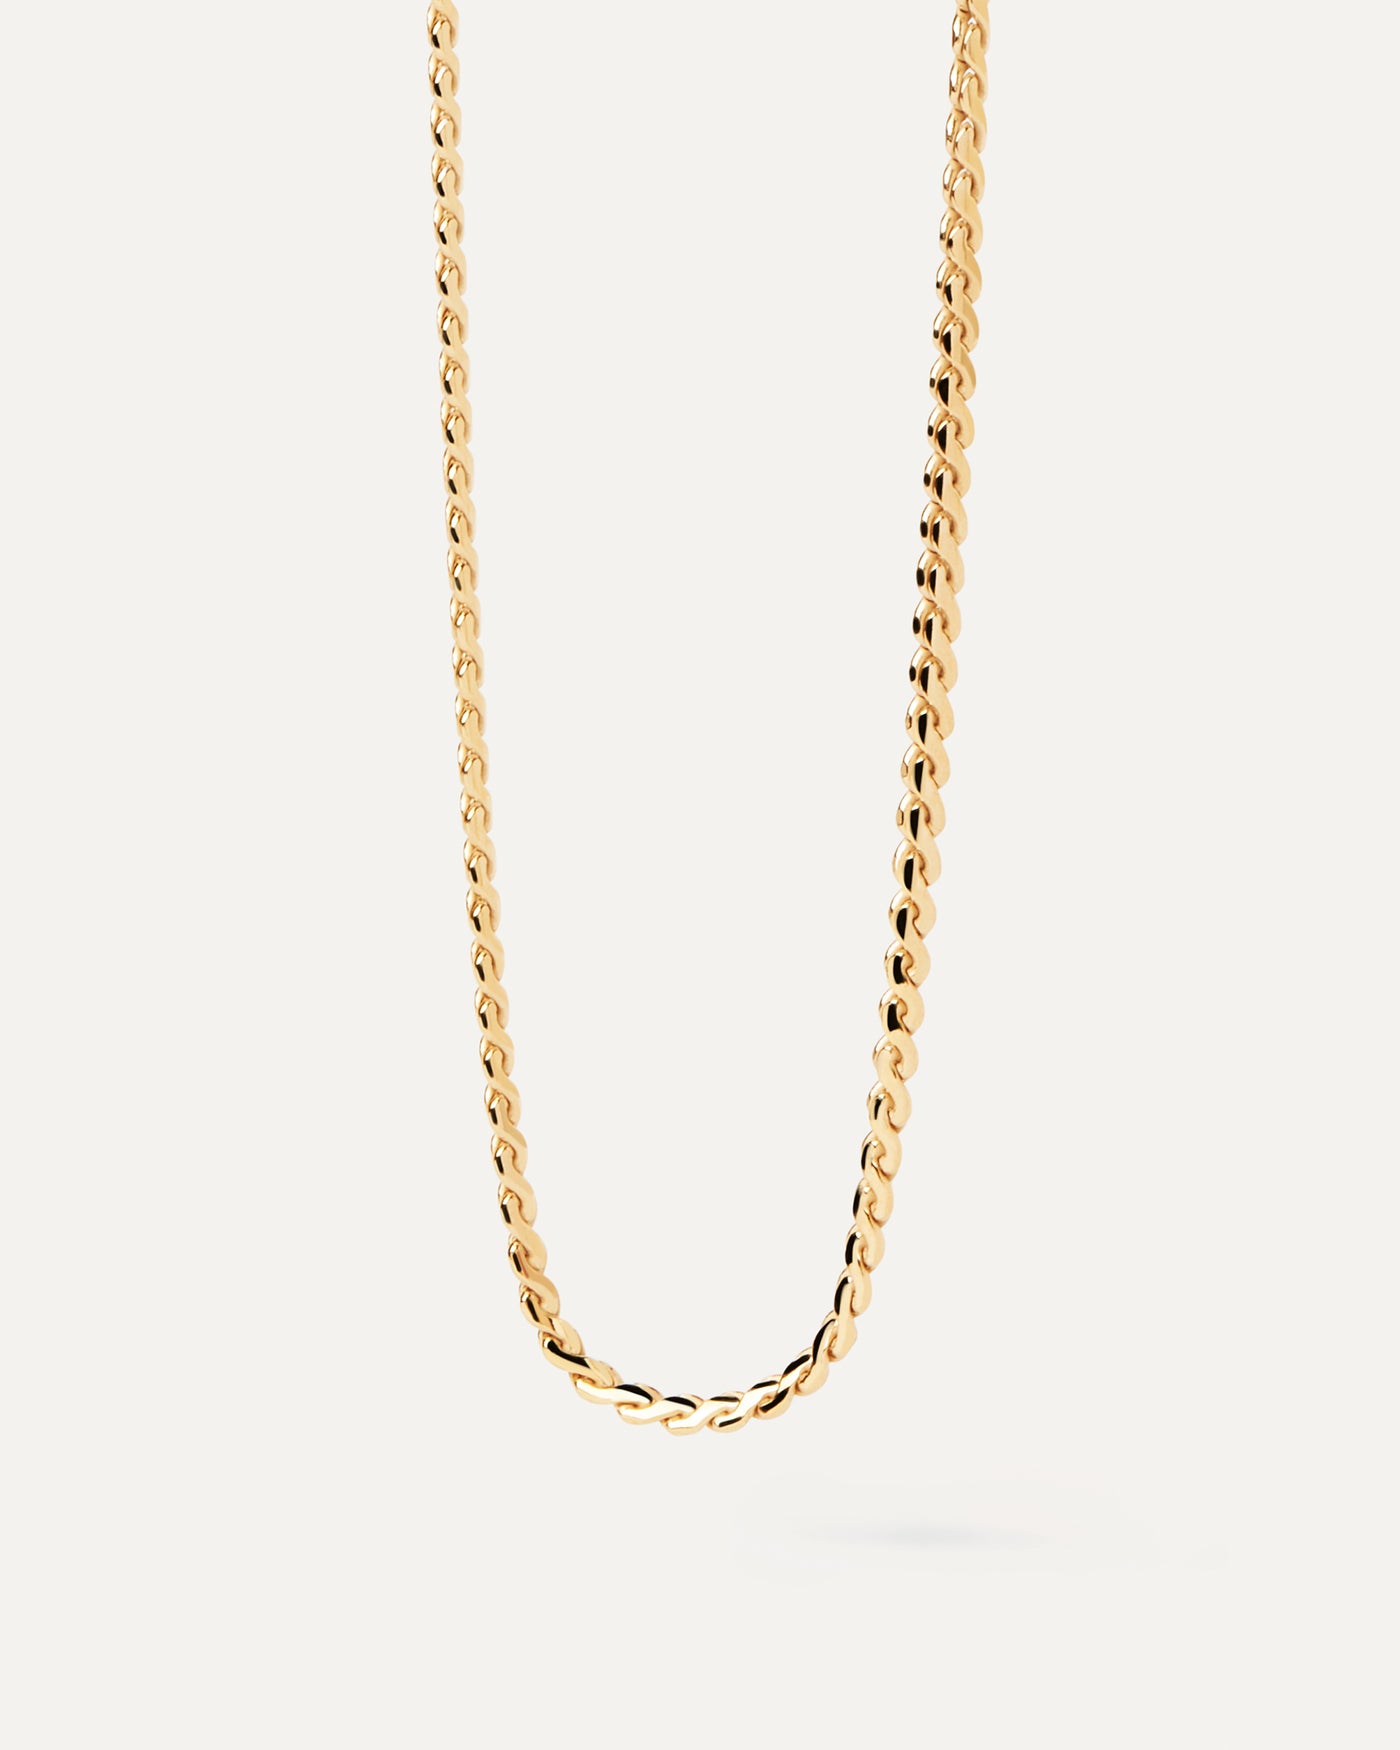 2023 Selection | Serpentine Chain Necklace. Modern gold-plated serpentine chain necklace with braided links. Get the latest arrival from PDPAOLA. Place your order safely and get this Best Seller. Free Shipping.